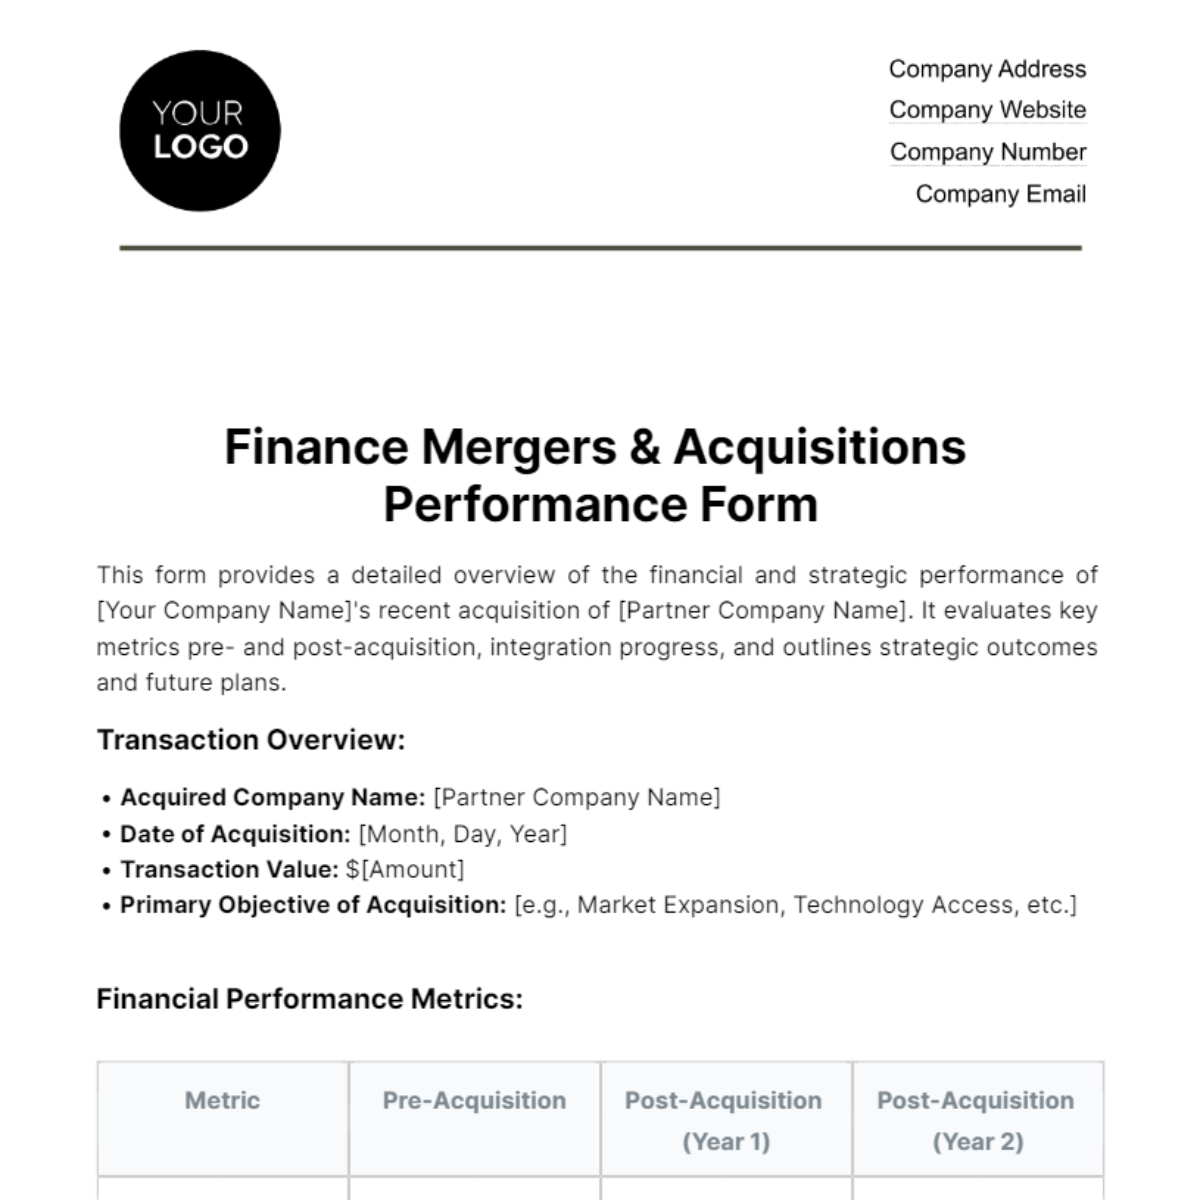 Free Finance Mergers & Acquisitions Performance Form Template